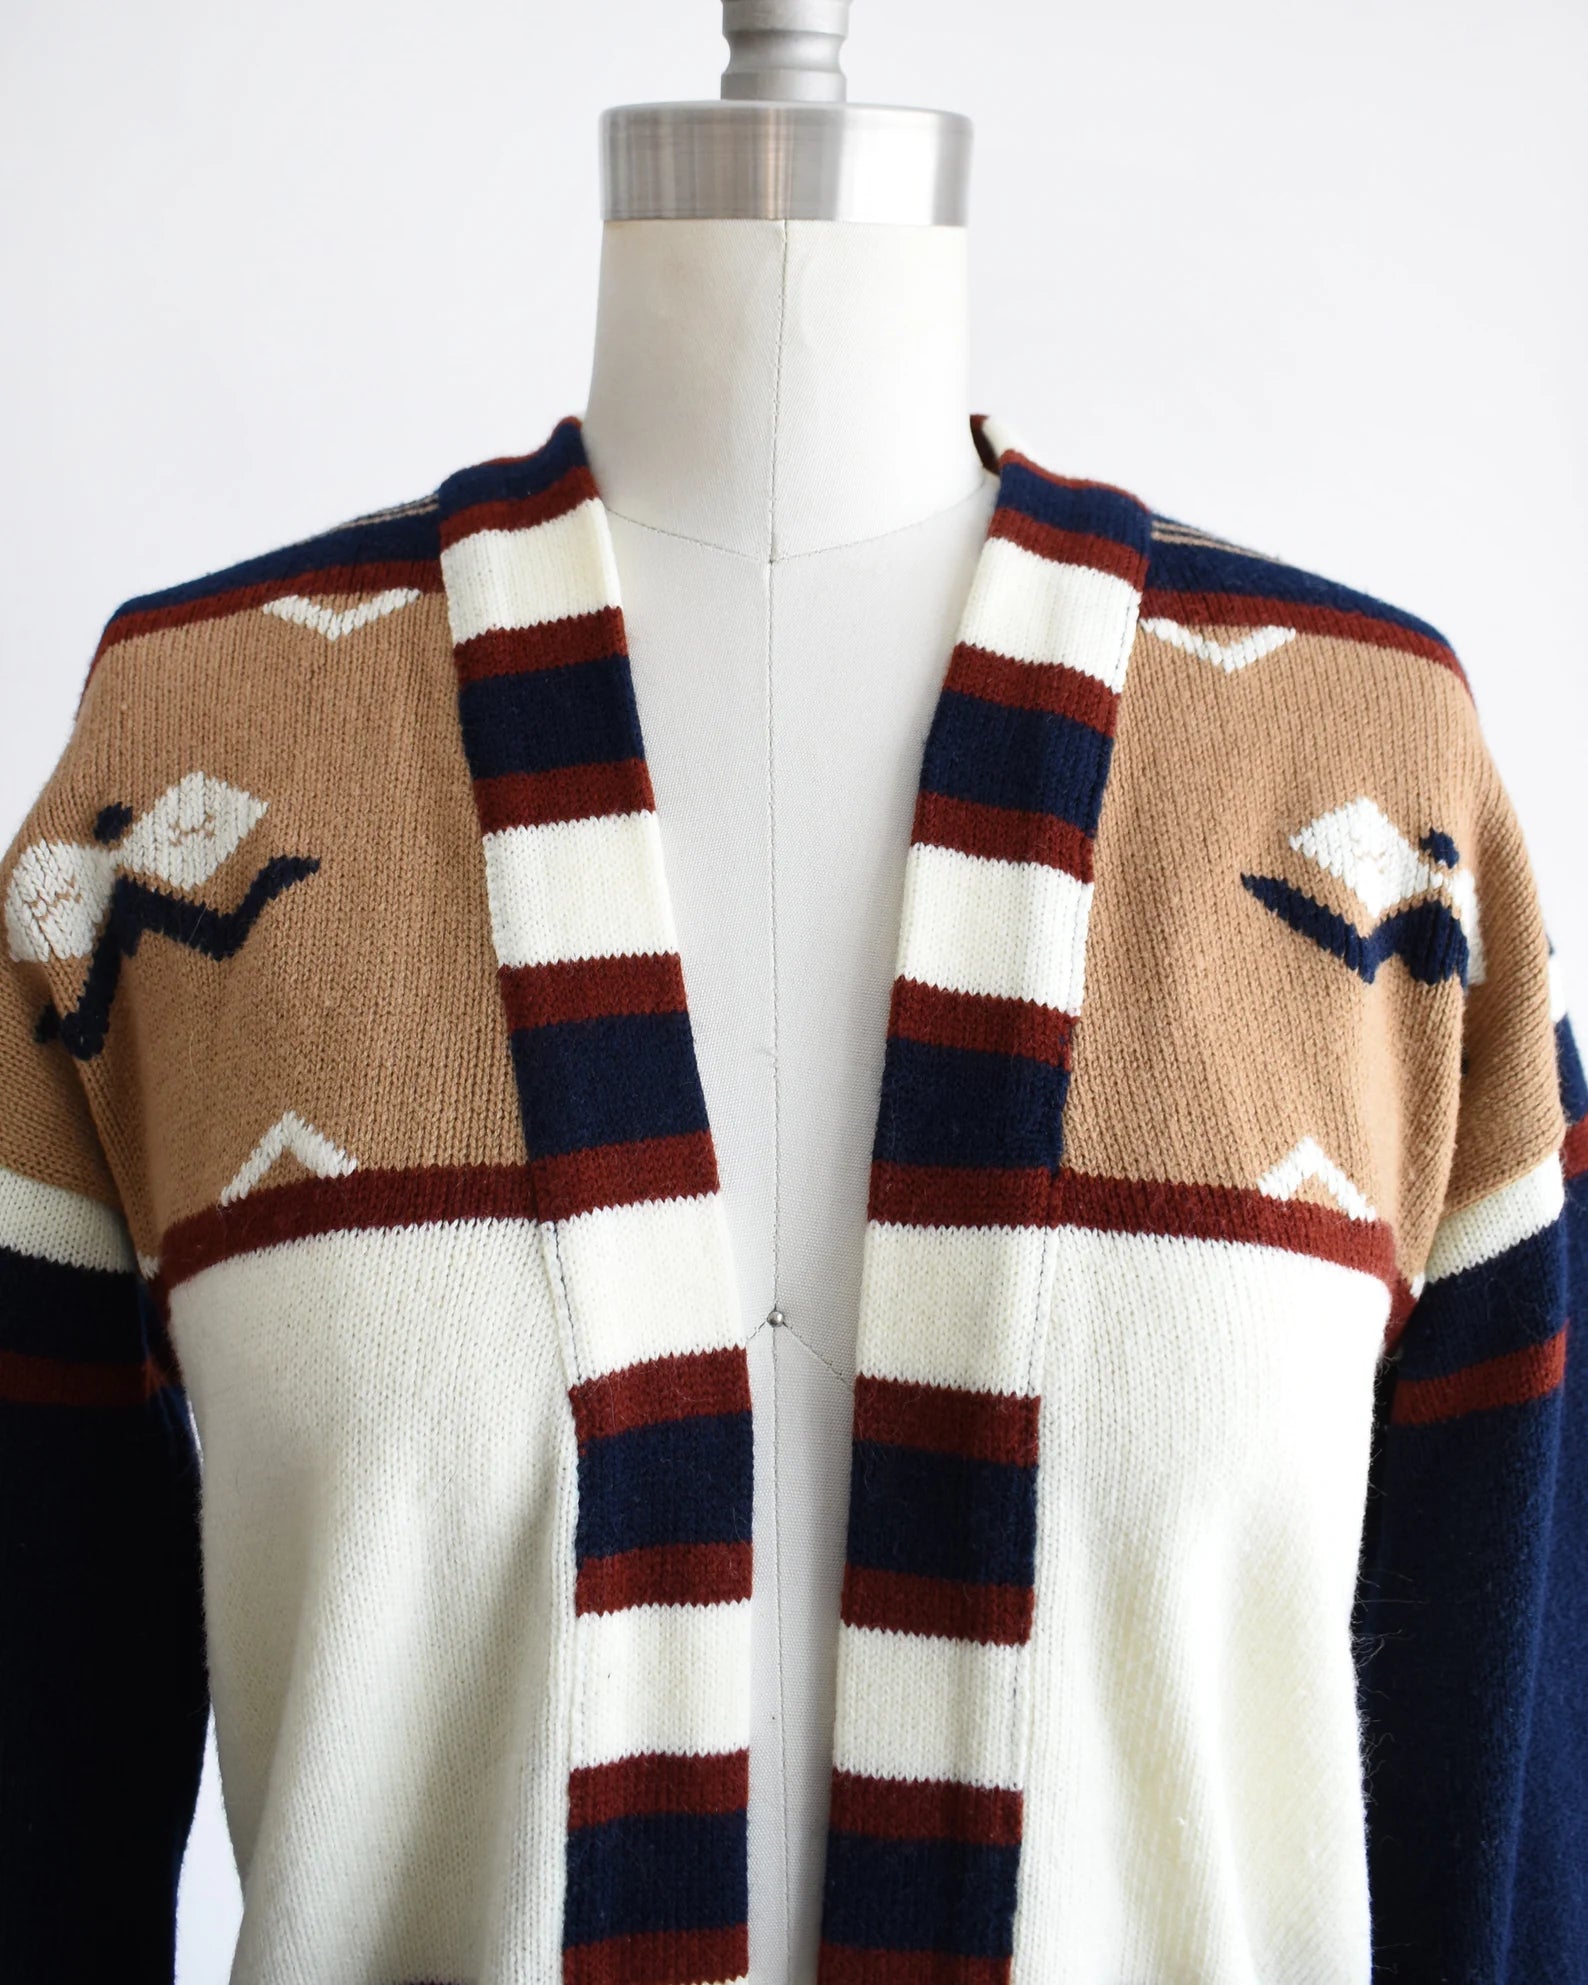 Close up of the upper part of the cardigan that shows the southwestern motif on the shoulders